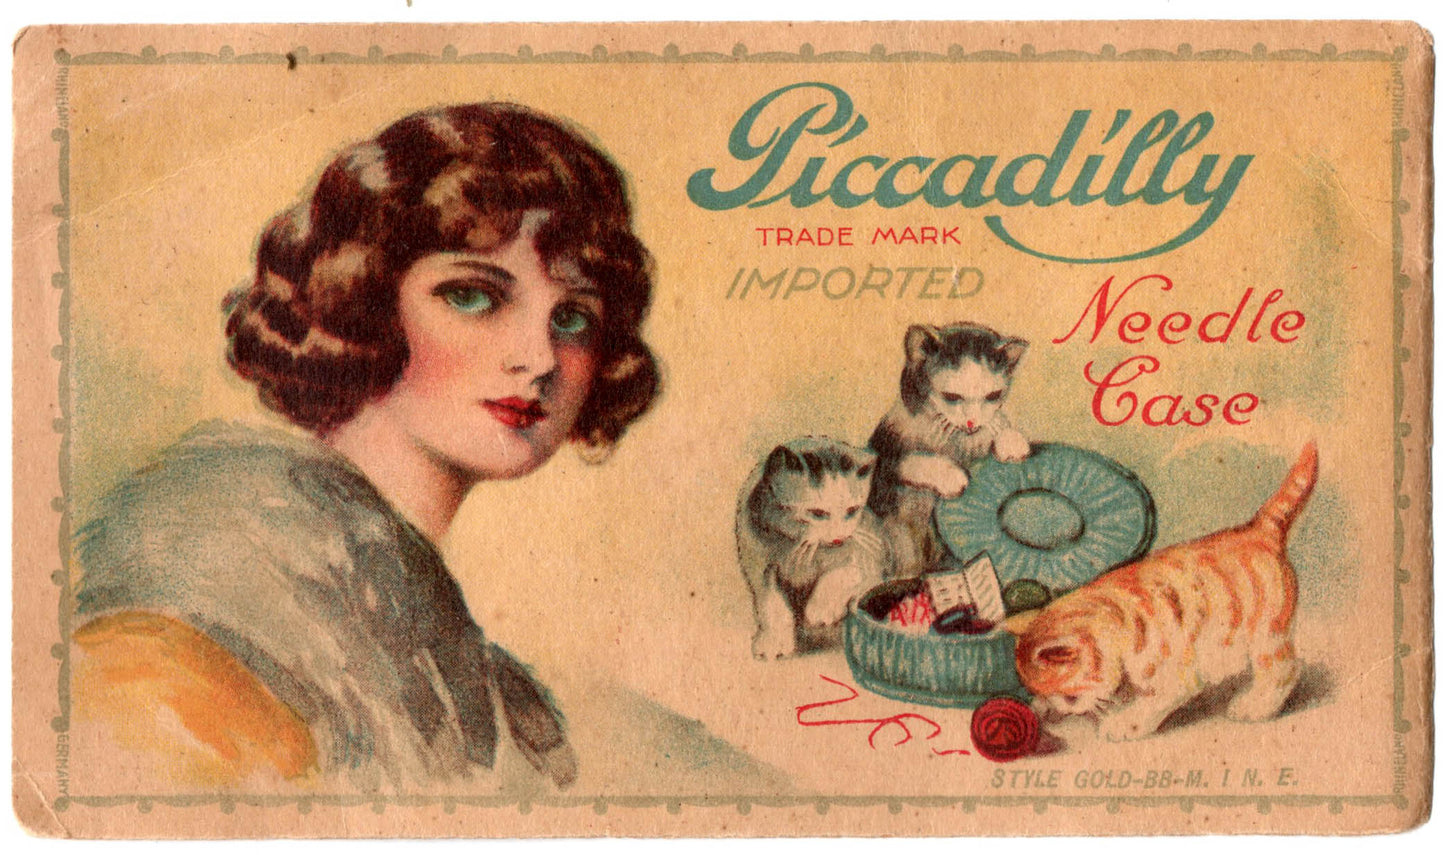 Piccadilly Brand Collectable 1930s/40s Vintage Sewing Needle Card with Needles